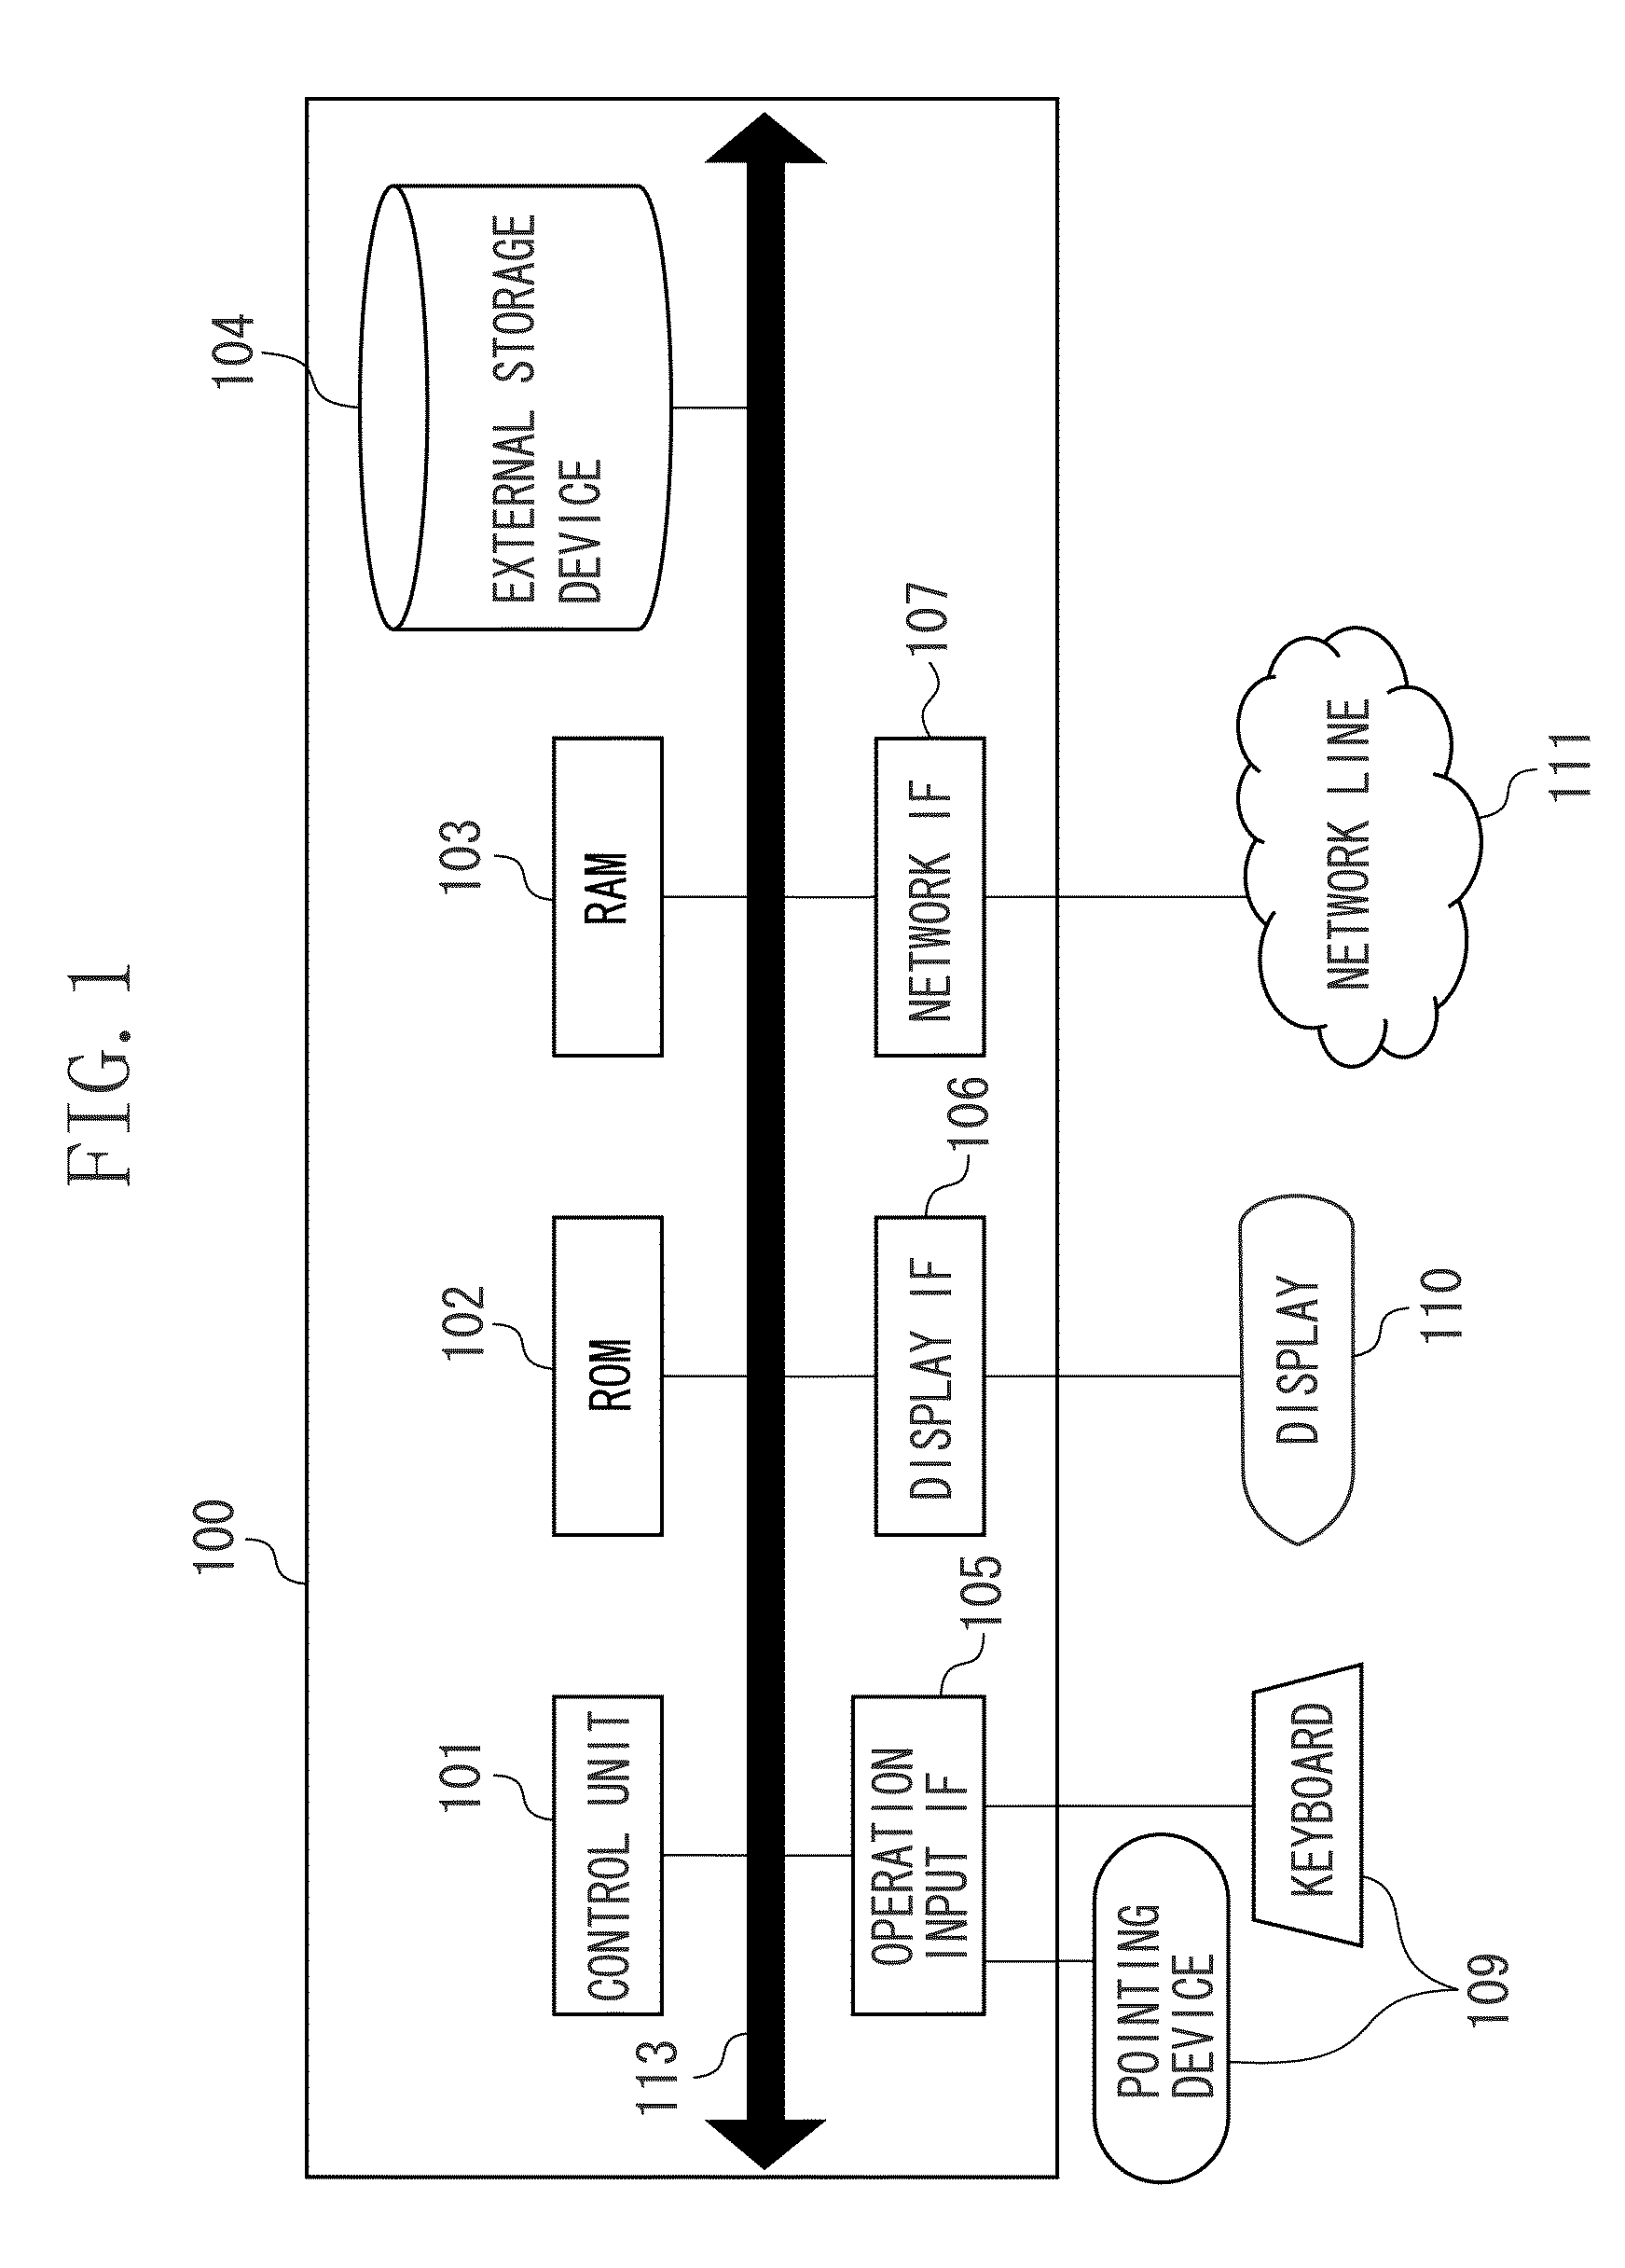 Image editing apparatus and method for controlling the same, and storage medium storing program